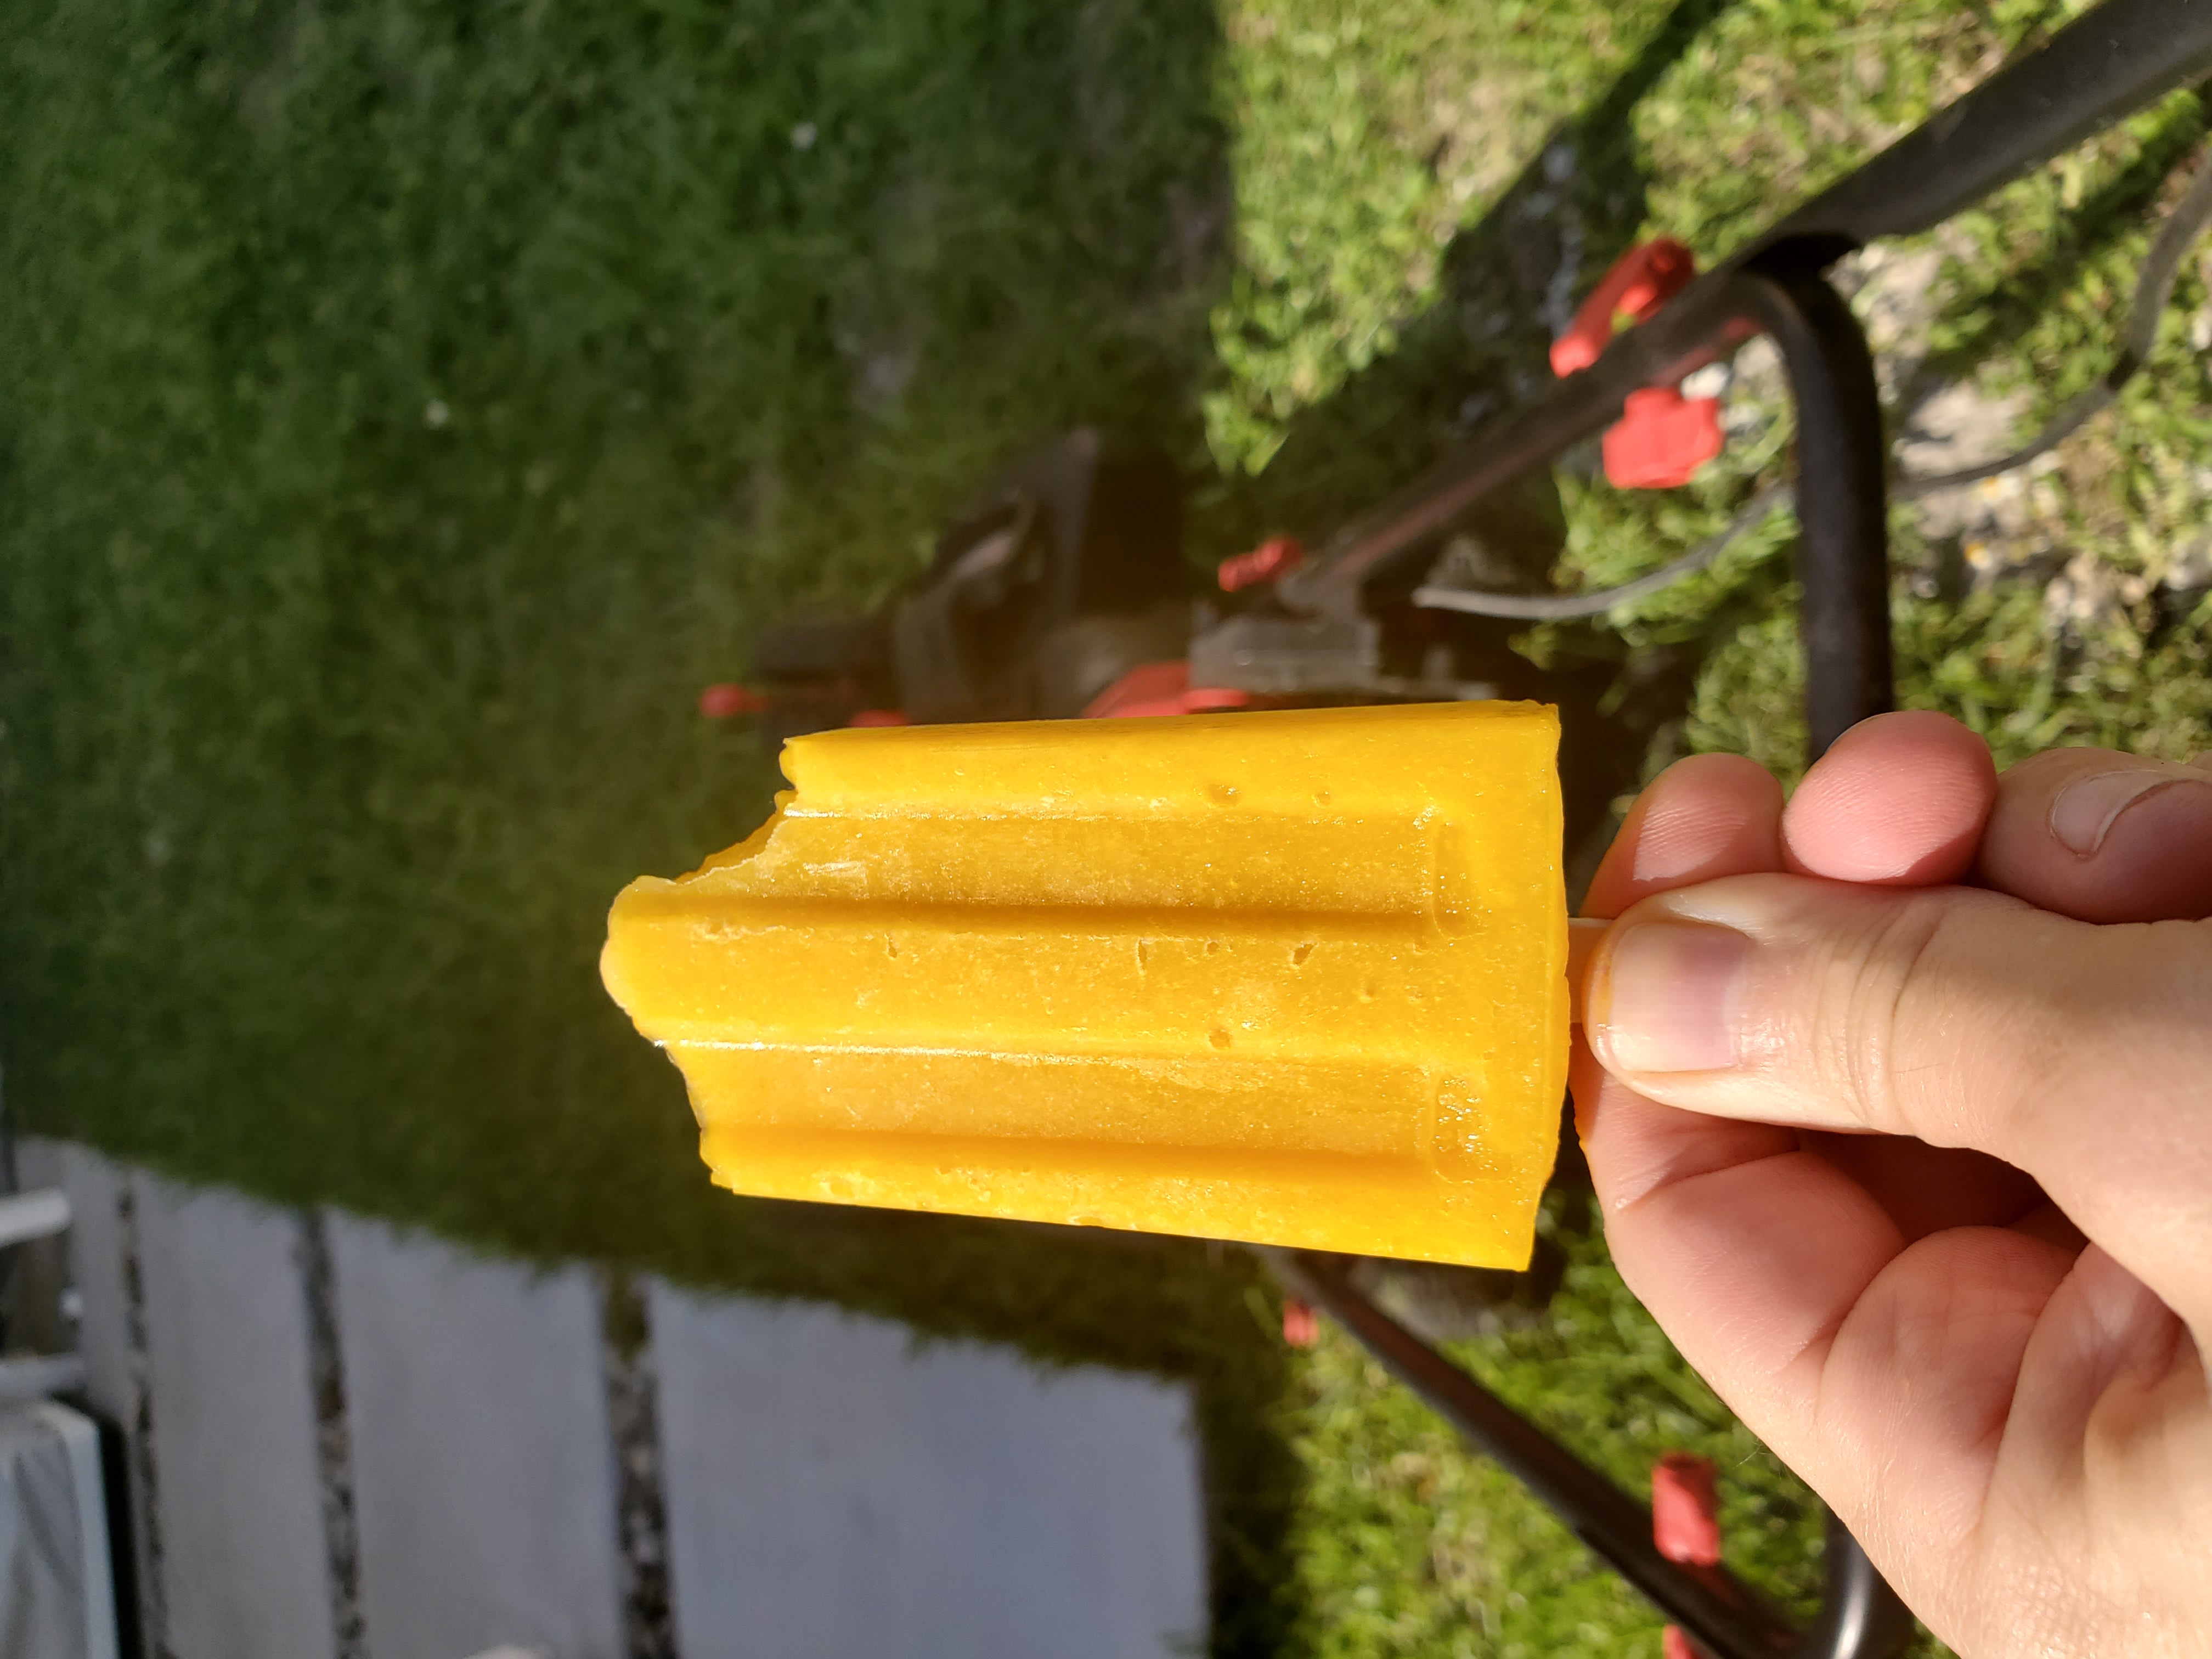 Mango Popsicle while mowing the lawn